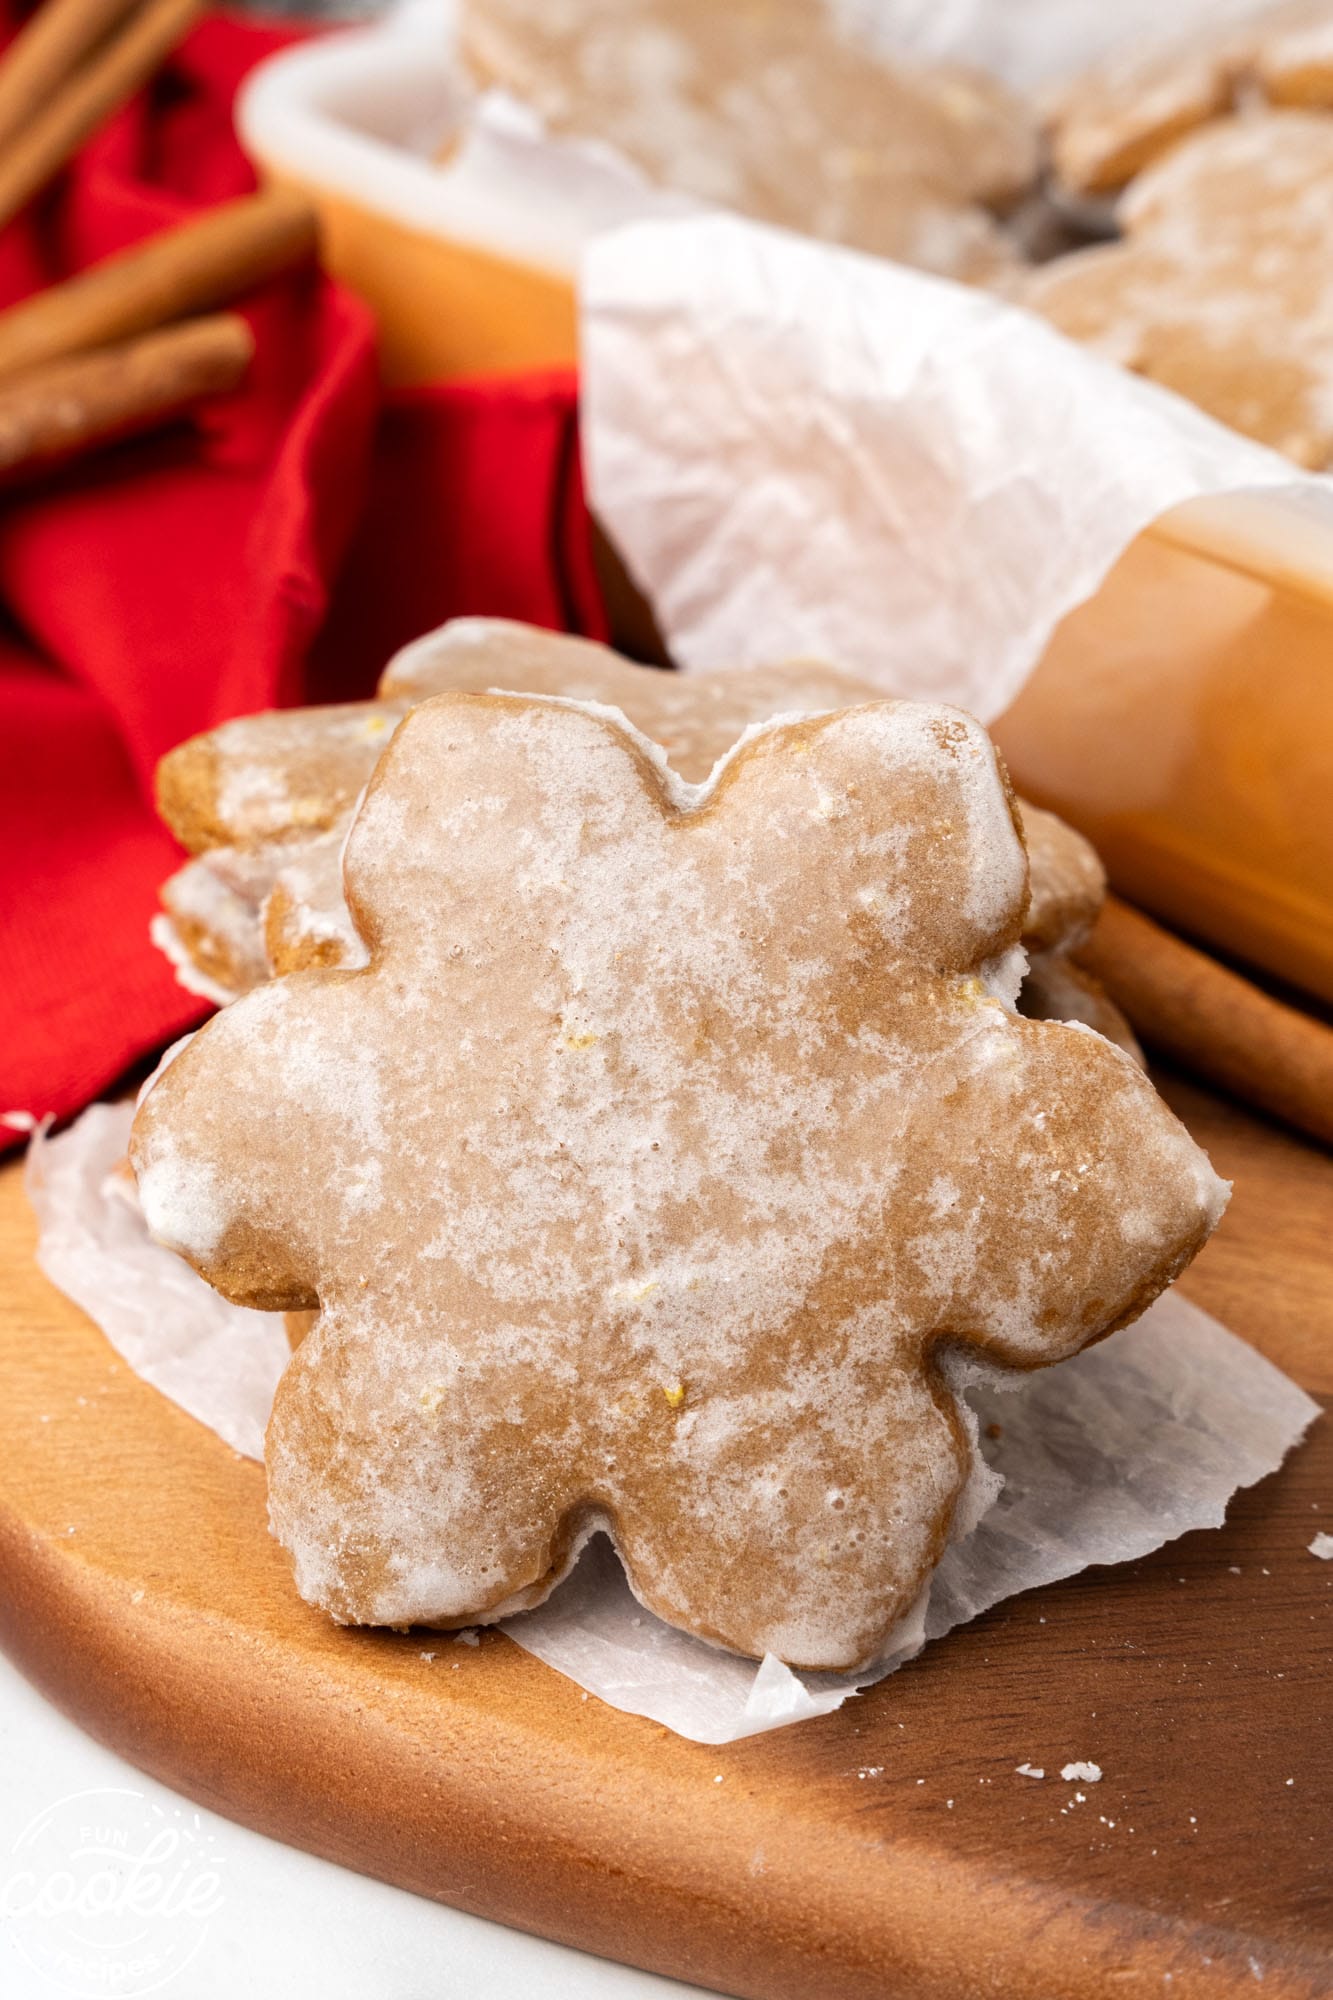 lebkuchen, cut in the shape of snowflakes